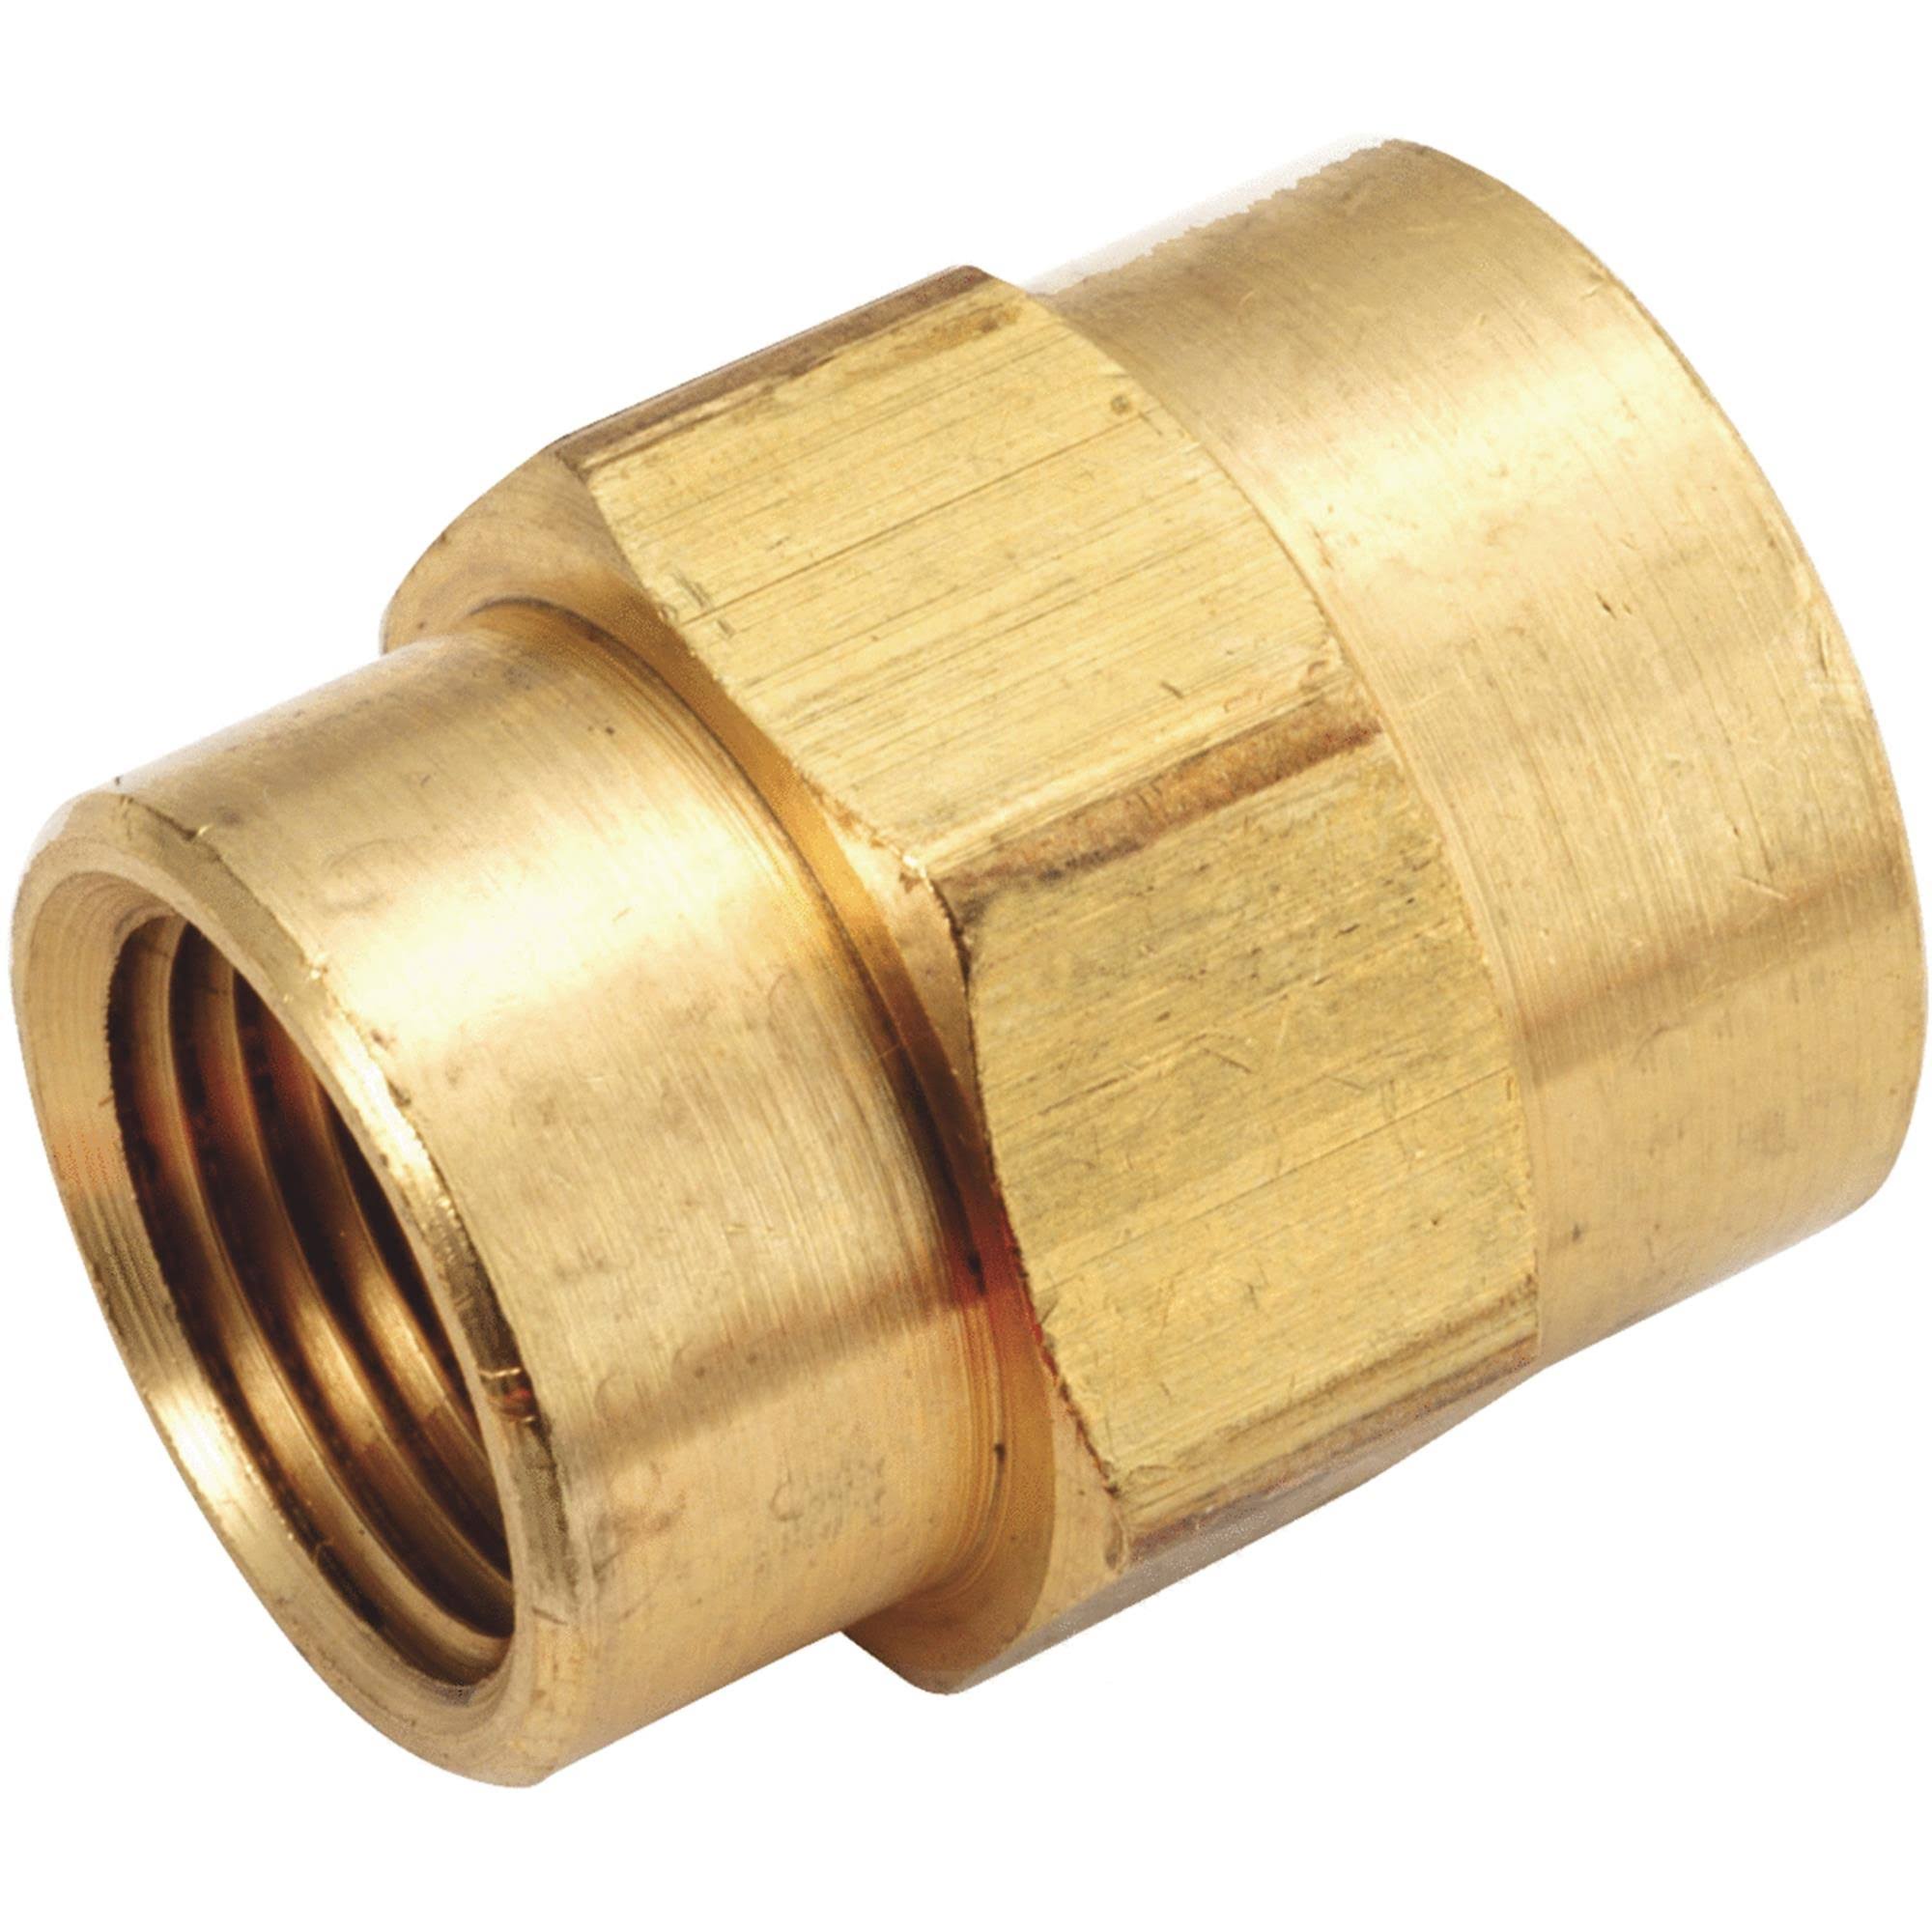 Anderson Metals Corp Inc 756119-0402 Reducing Coupling - Brass, 1/4" x 1/8"